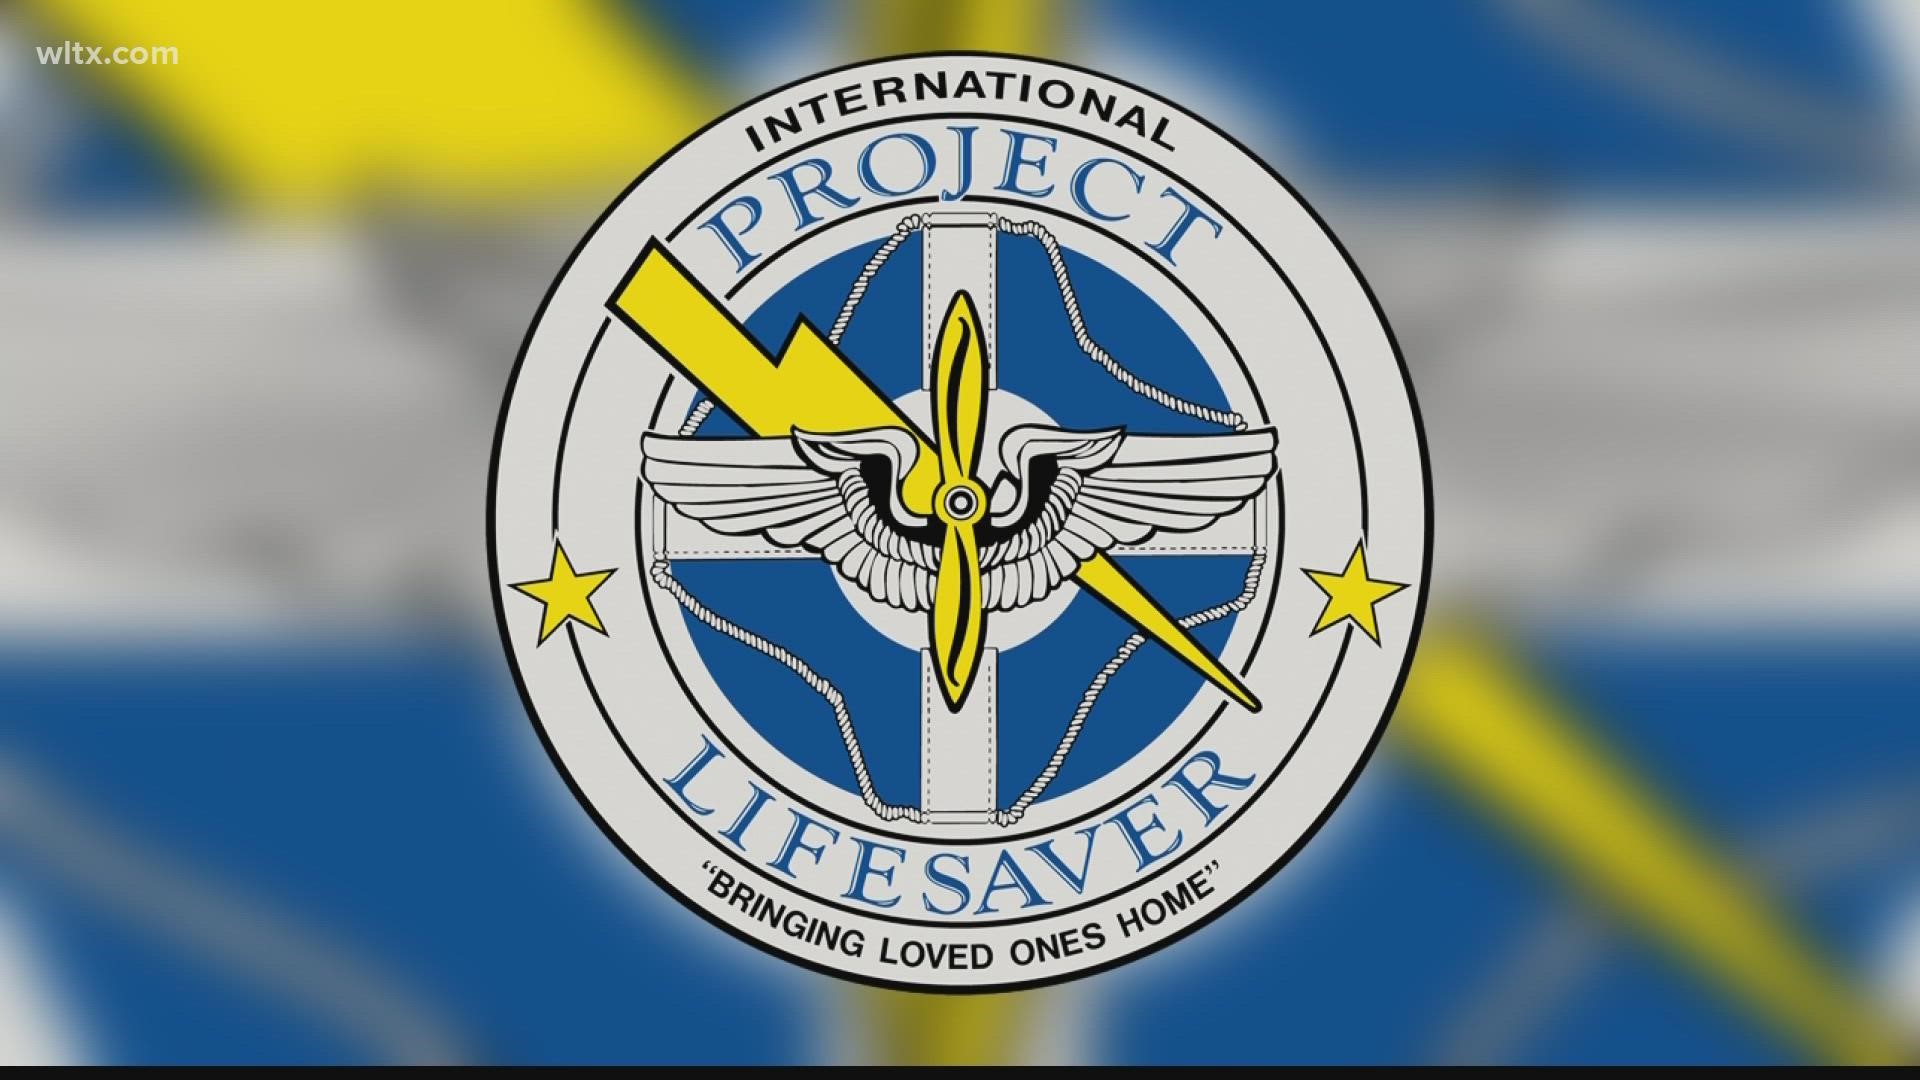 If you have a loved one in Richland County who has Alzheimer's, dementia or autism and tends to wander off, you might want to consider Project Lifesaver.